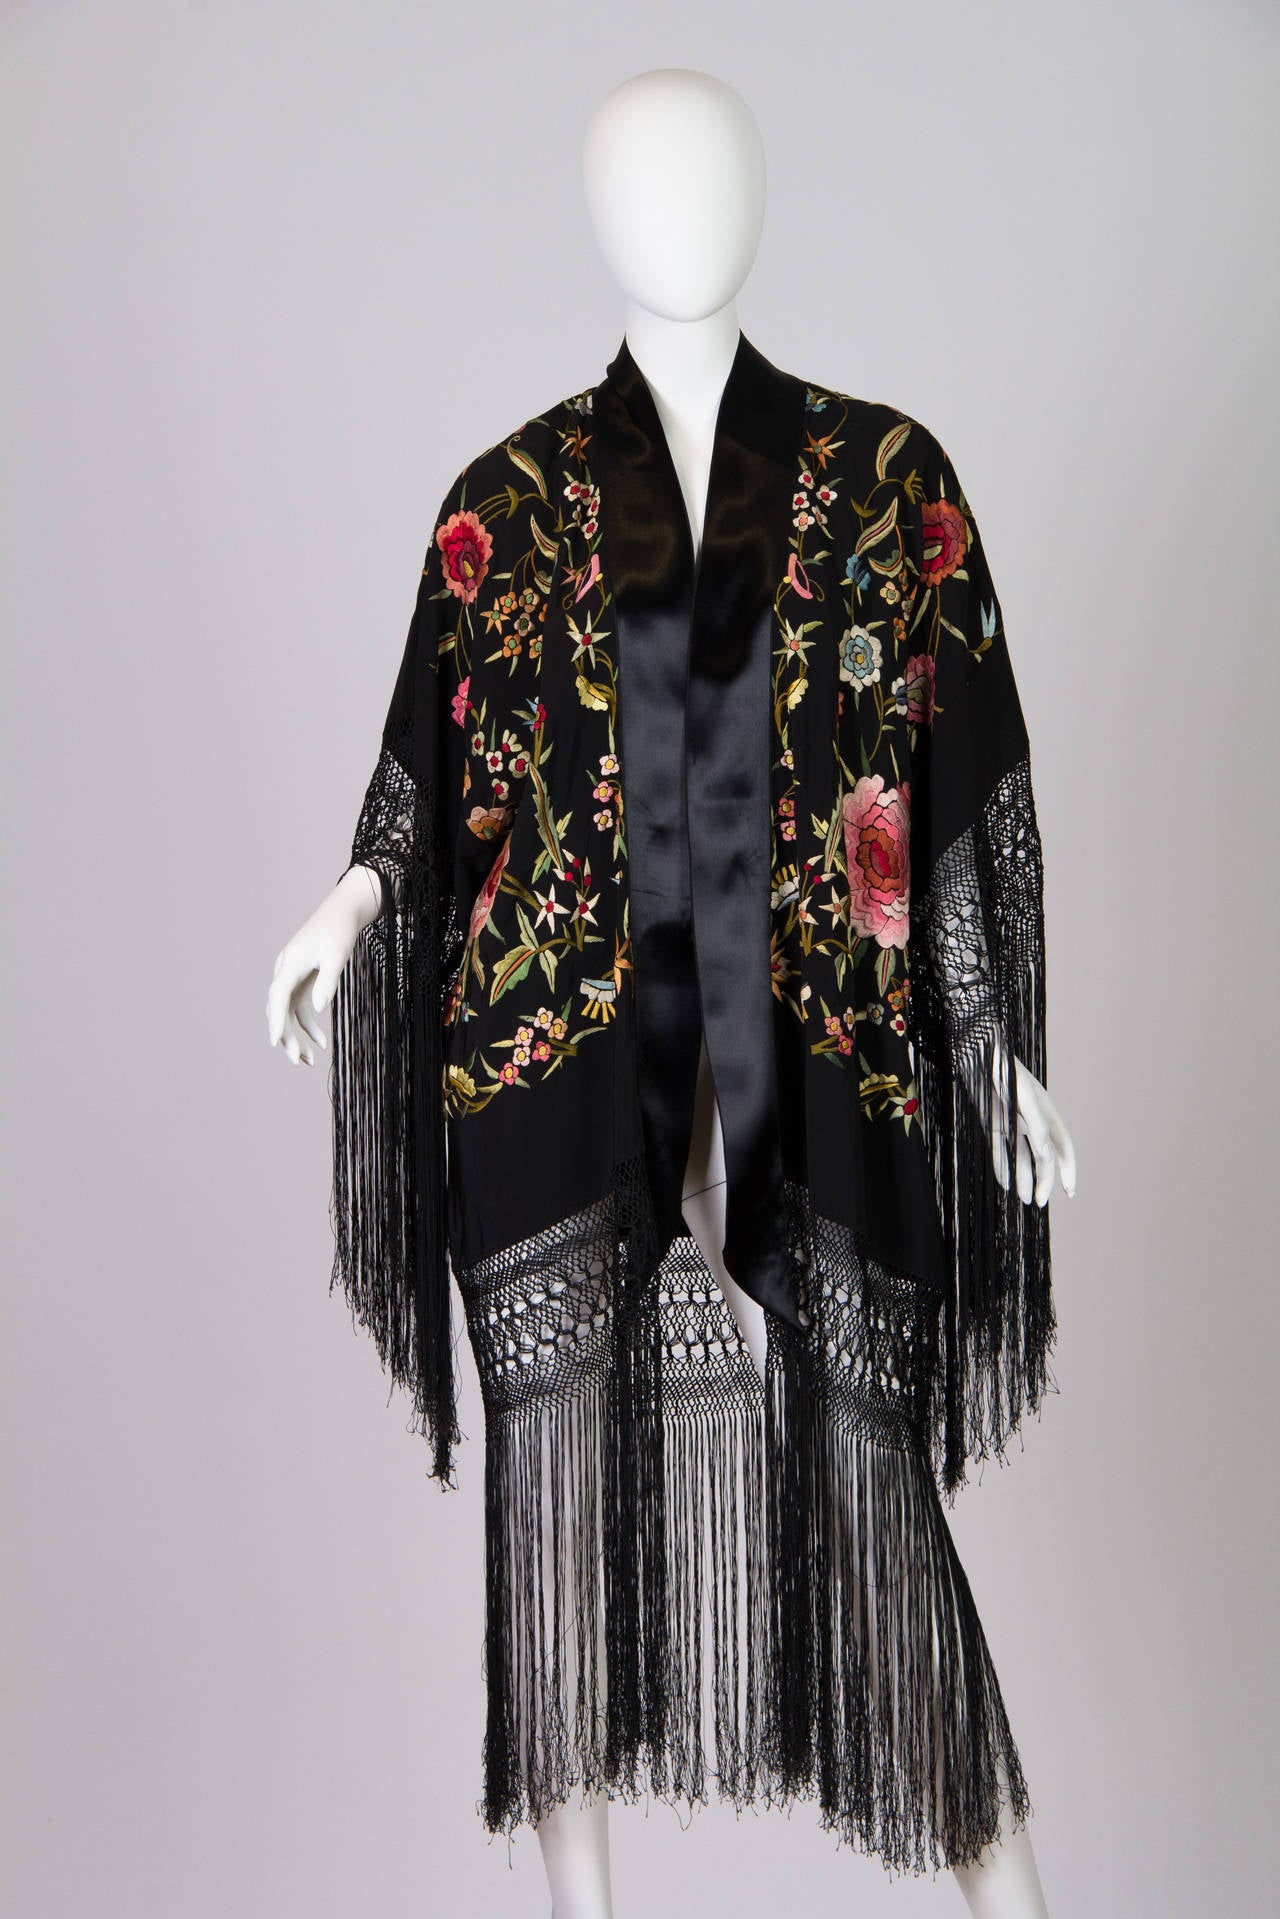 We made this ensemble from a beautiful hand embroidered piano shawl. The shawl dates from the 1910s to the 1940s however they were most produced and imported to the United States in the 1920s. It was common practice in the day to make boudoir